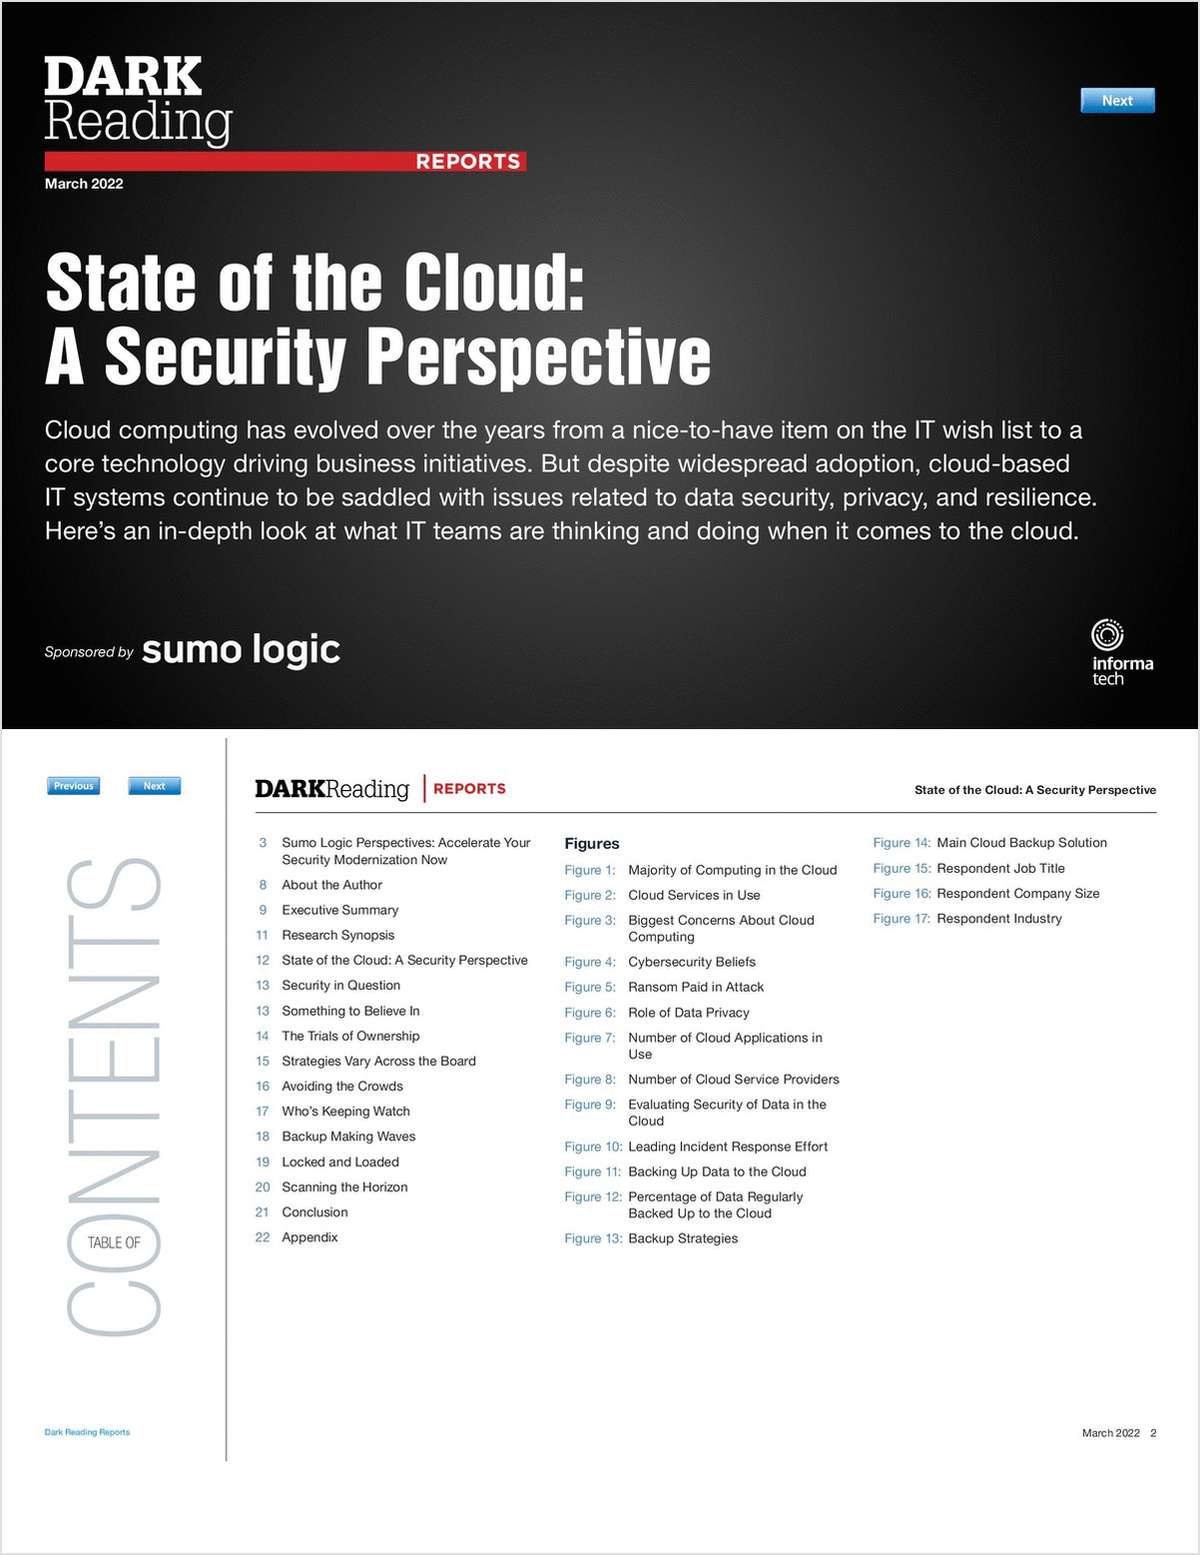 State of the Cloud: A Security Perspective